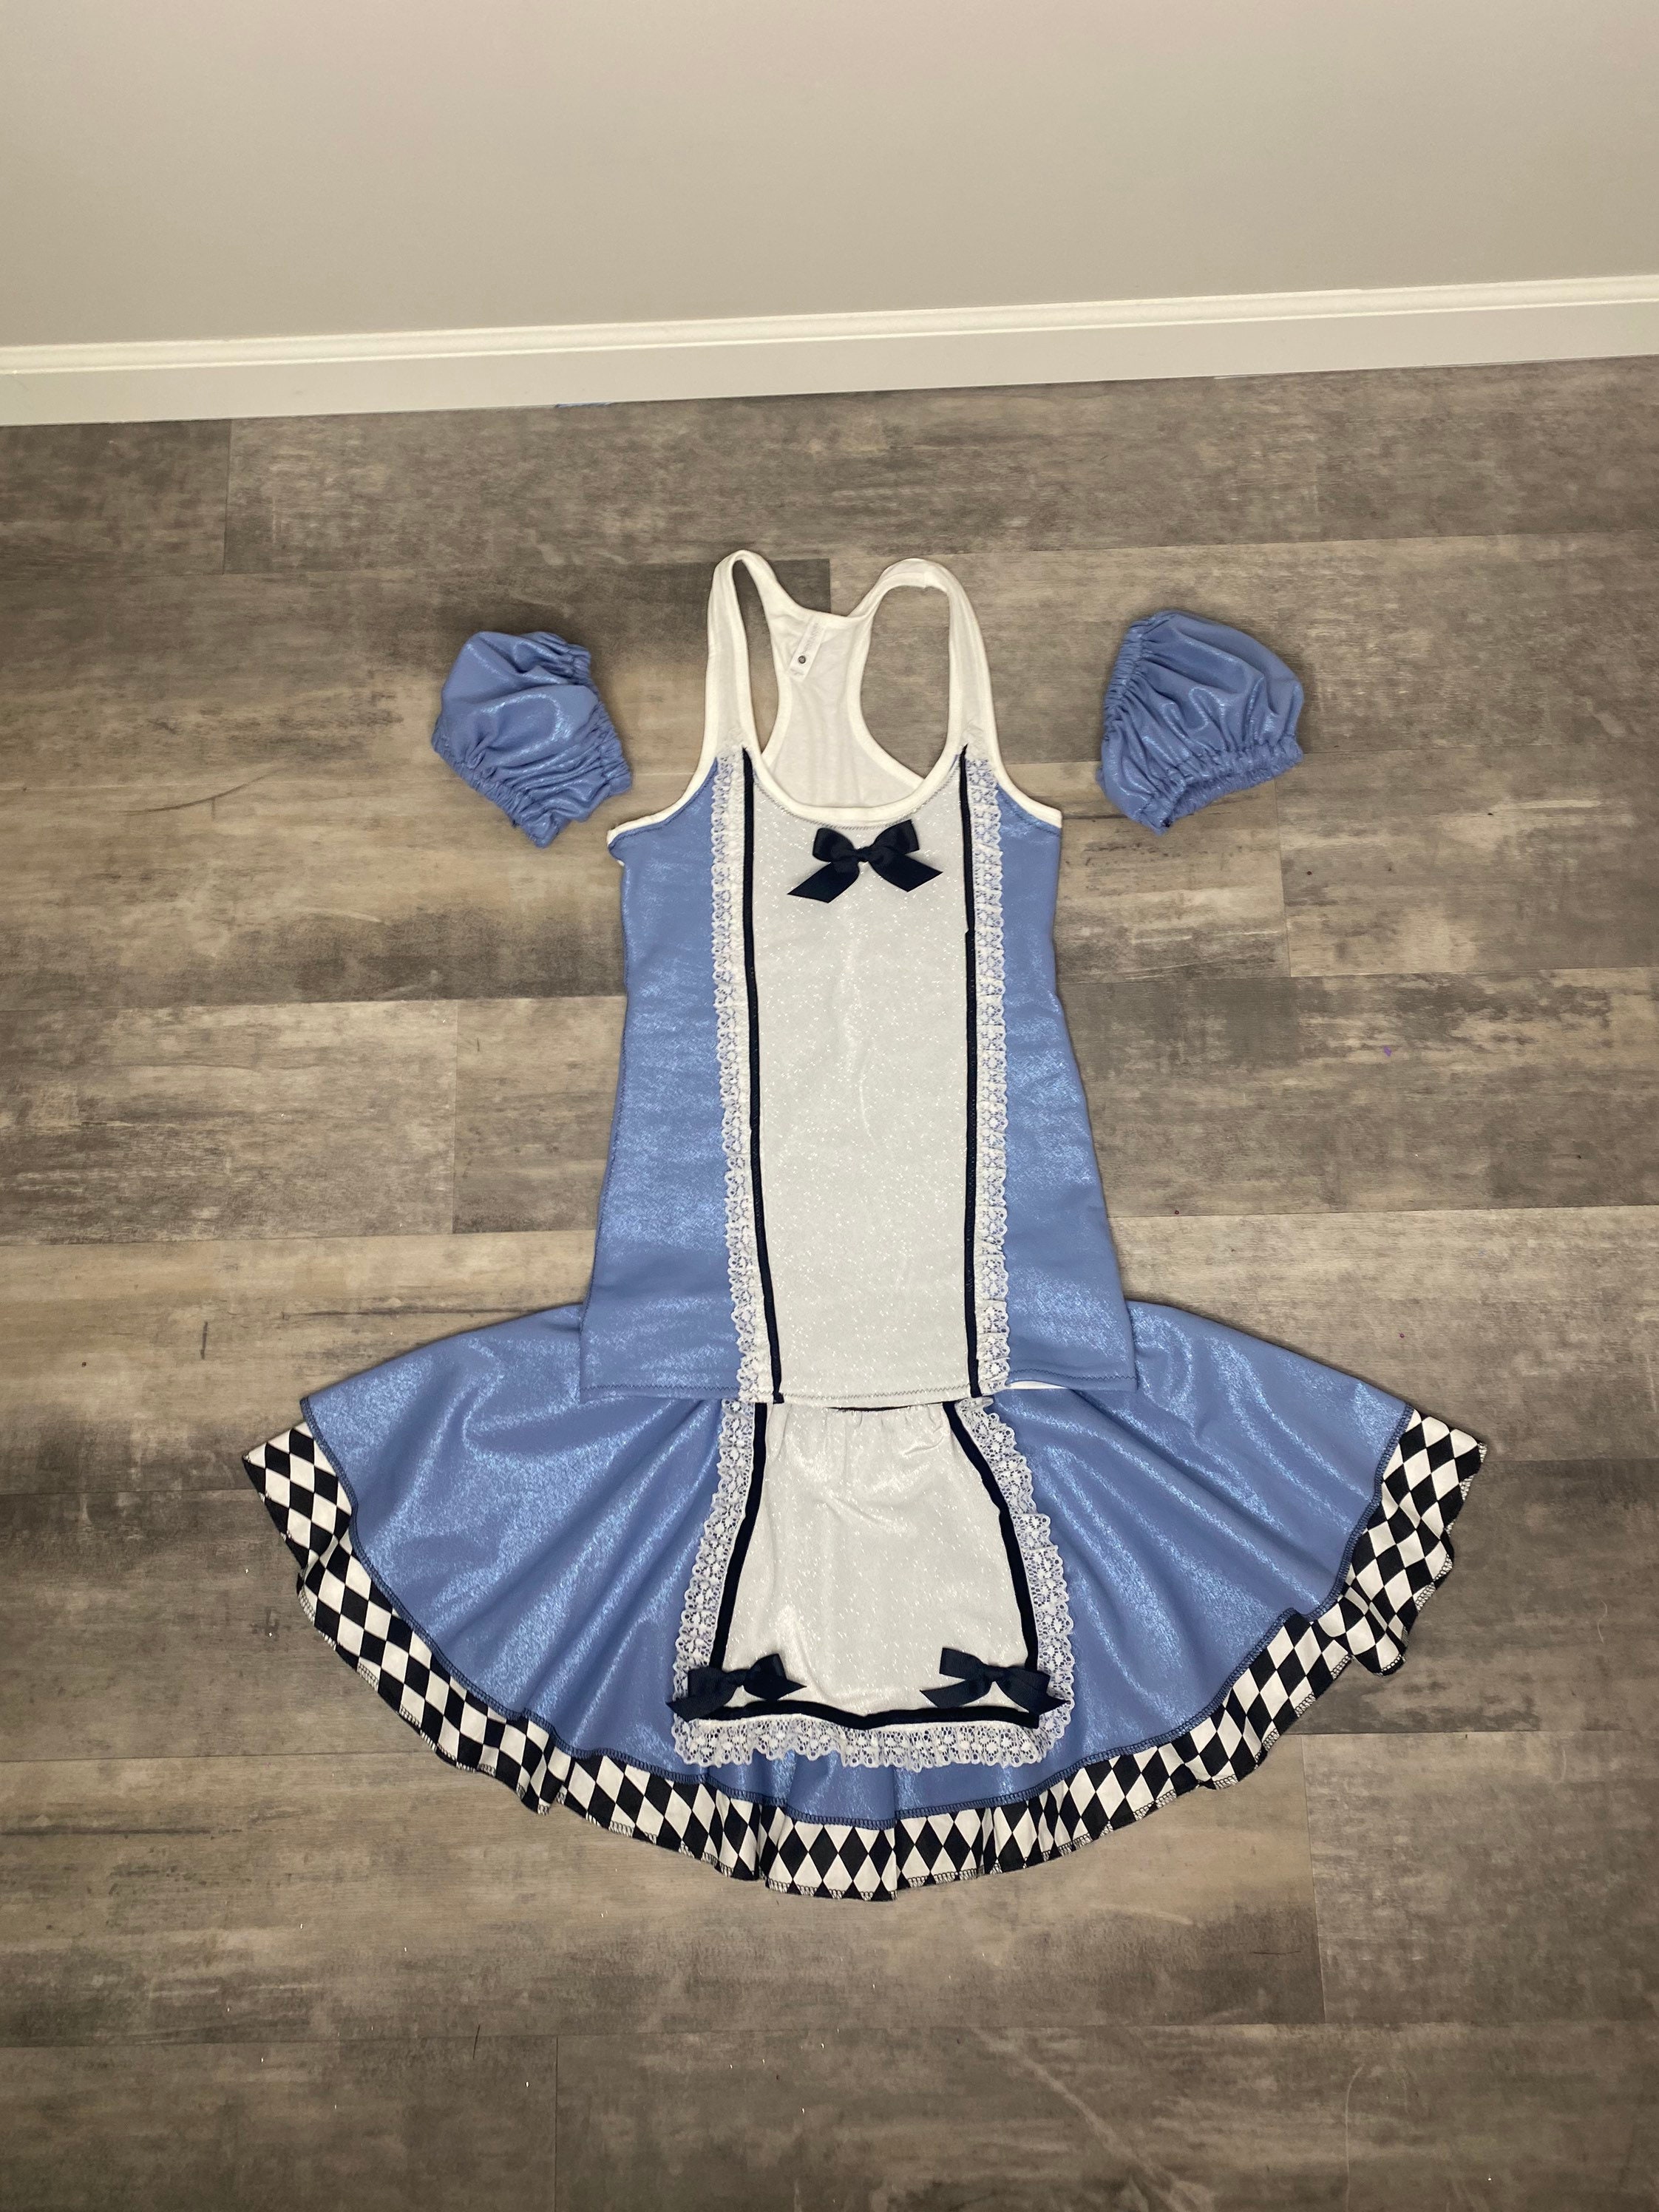 Bling Alice in Wonderland Dress Inspired Running Complete Outfit